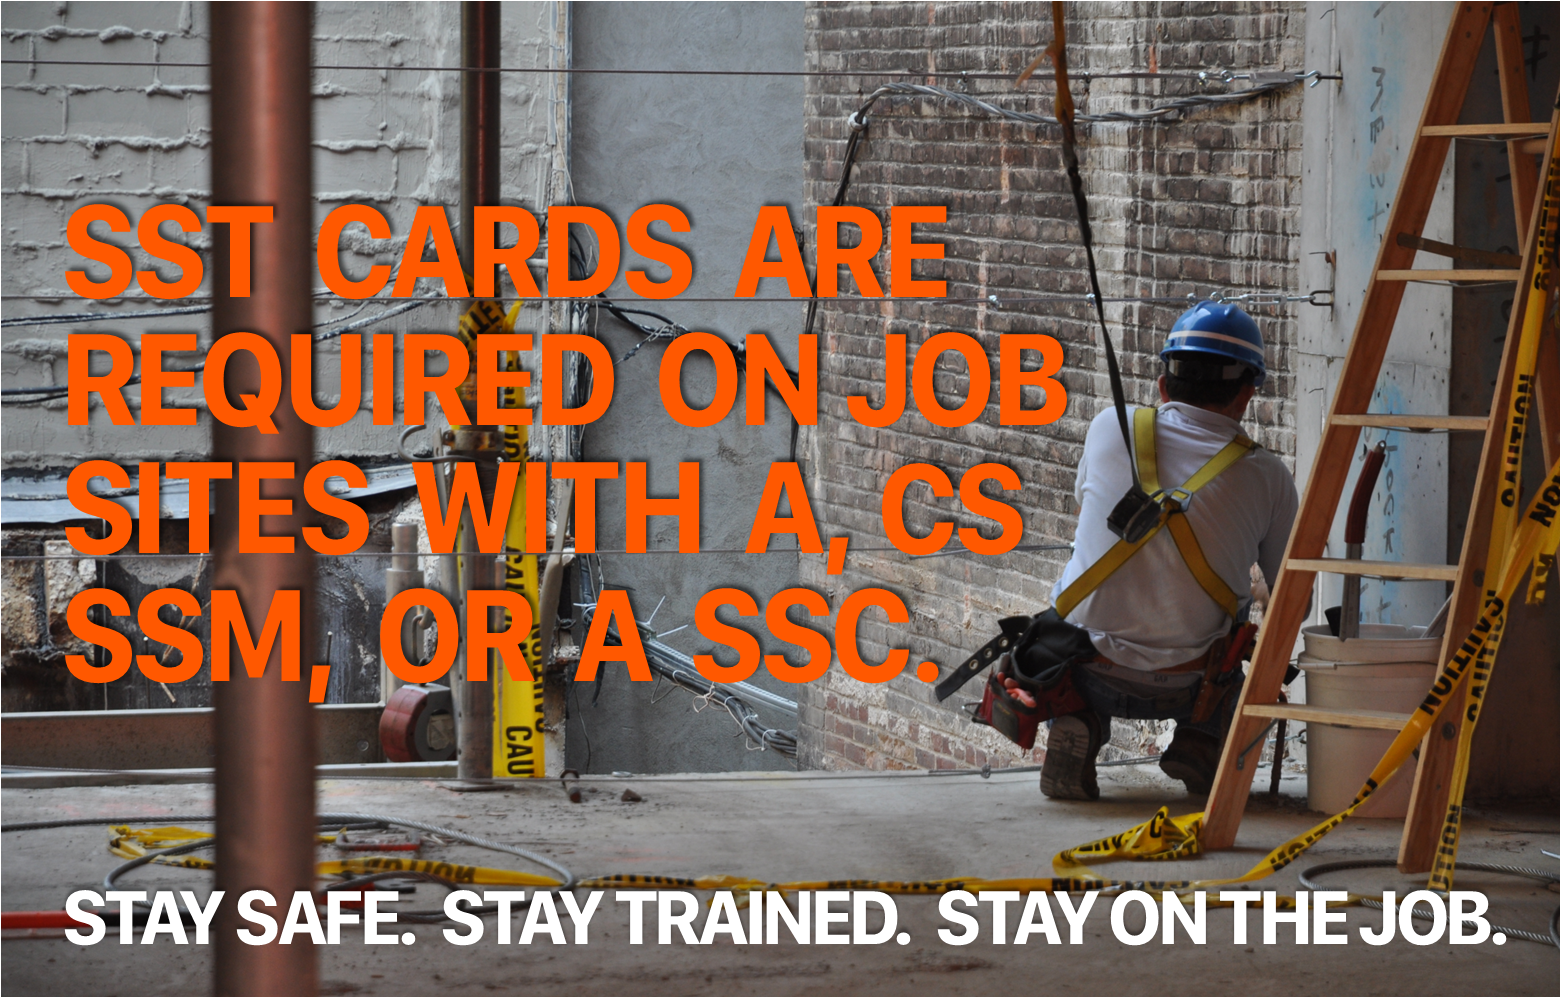 A man in hardhat with text overlaid that reads: "Stay safe. Stay trained. Stay on the job."